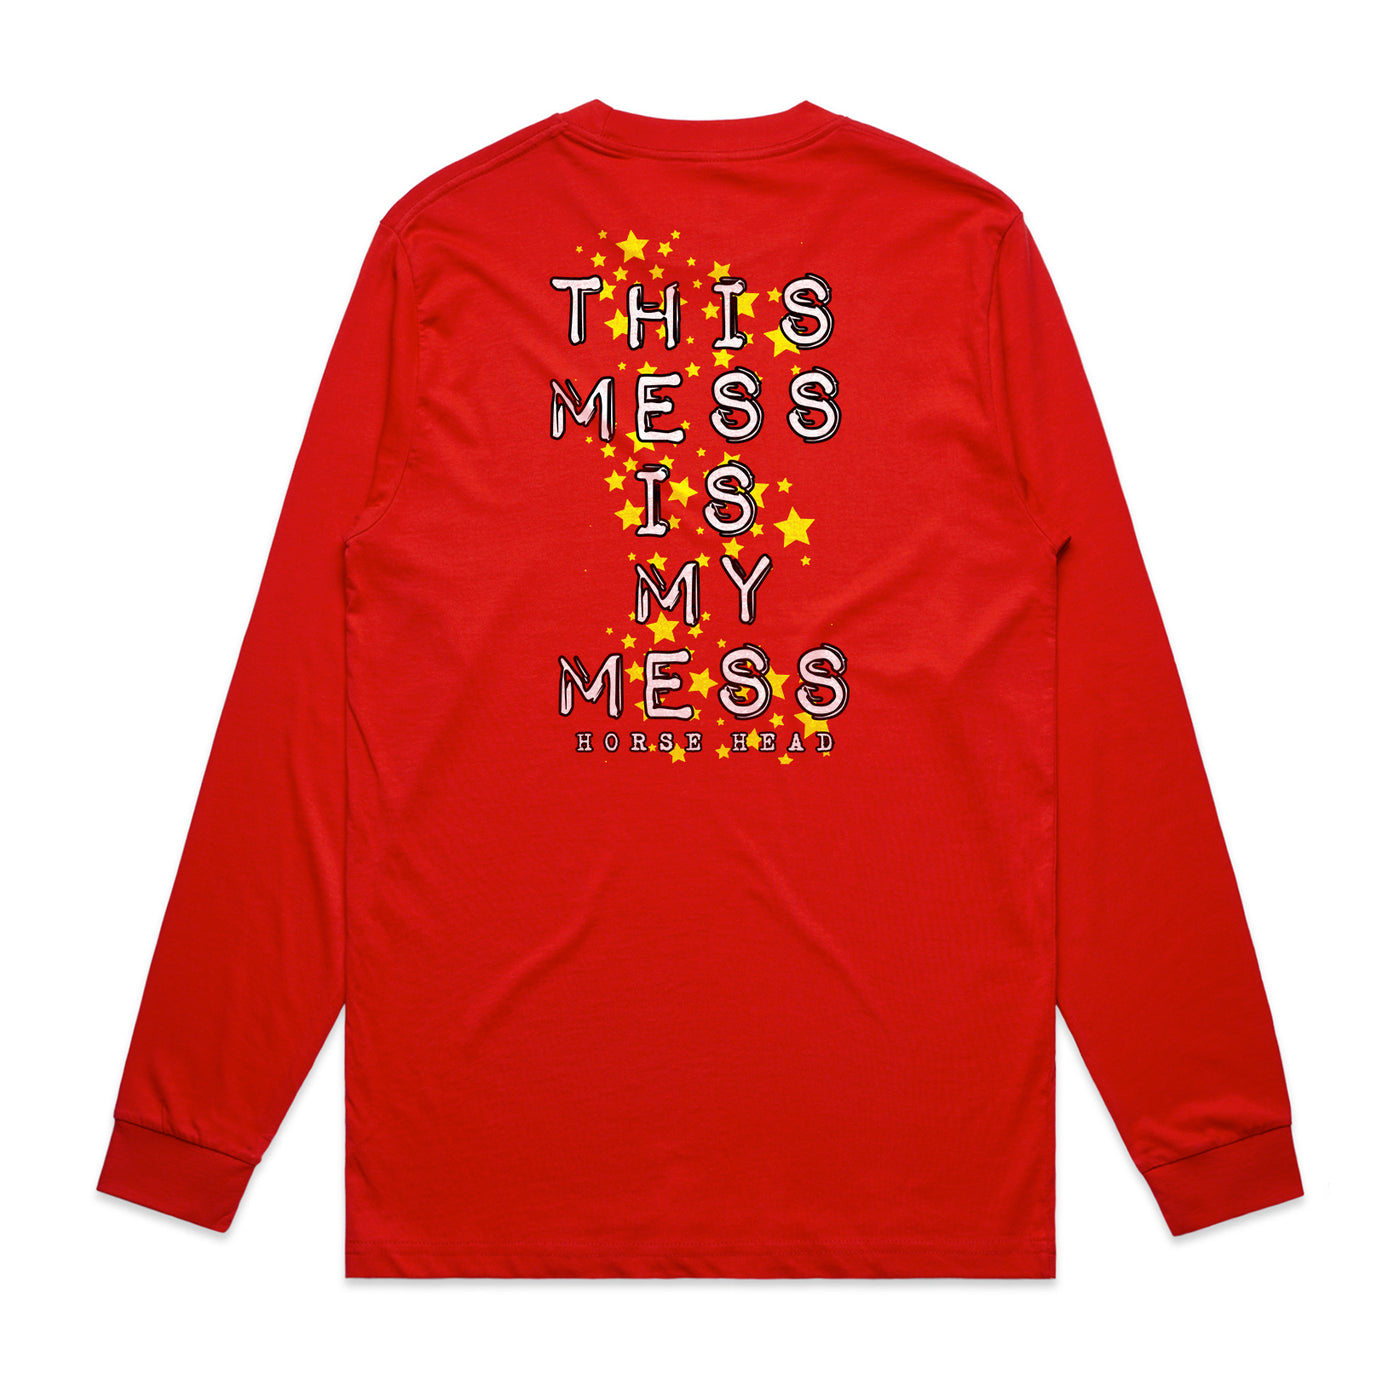 This Mess Long Sleeve